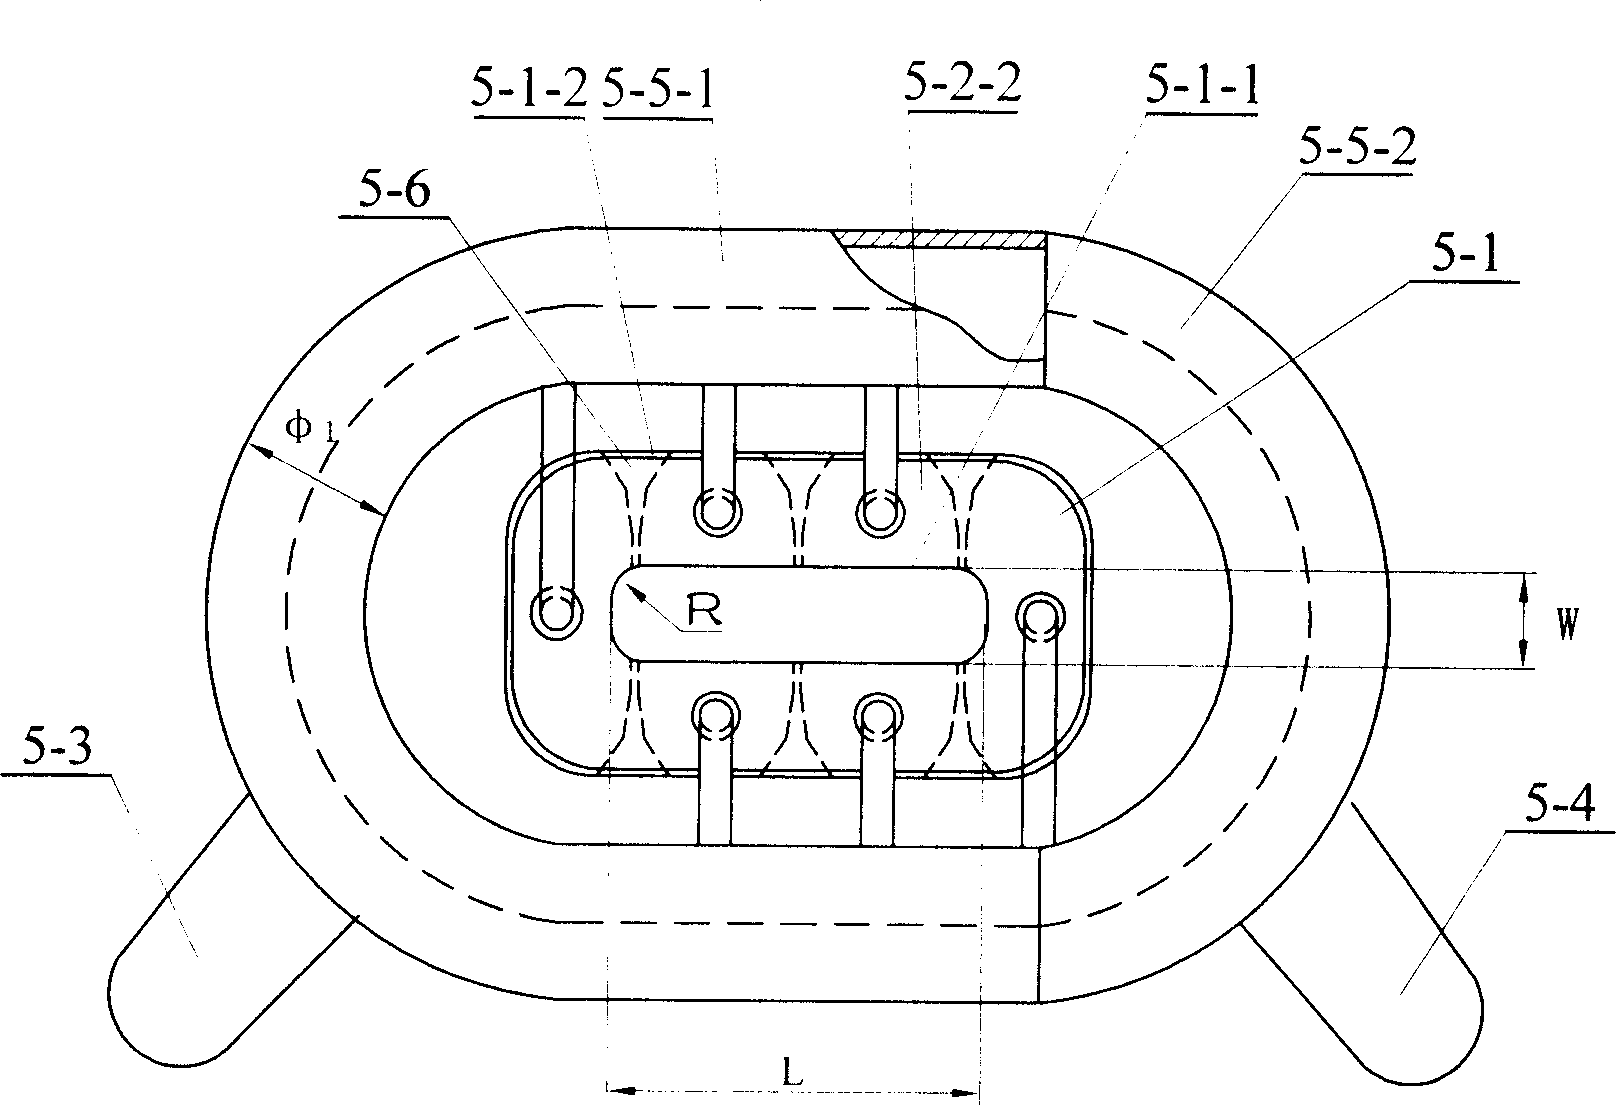 Directional freeze method for TiAl-based alloy plate